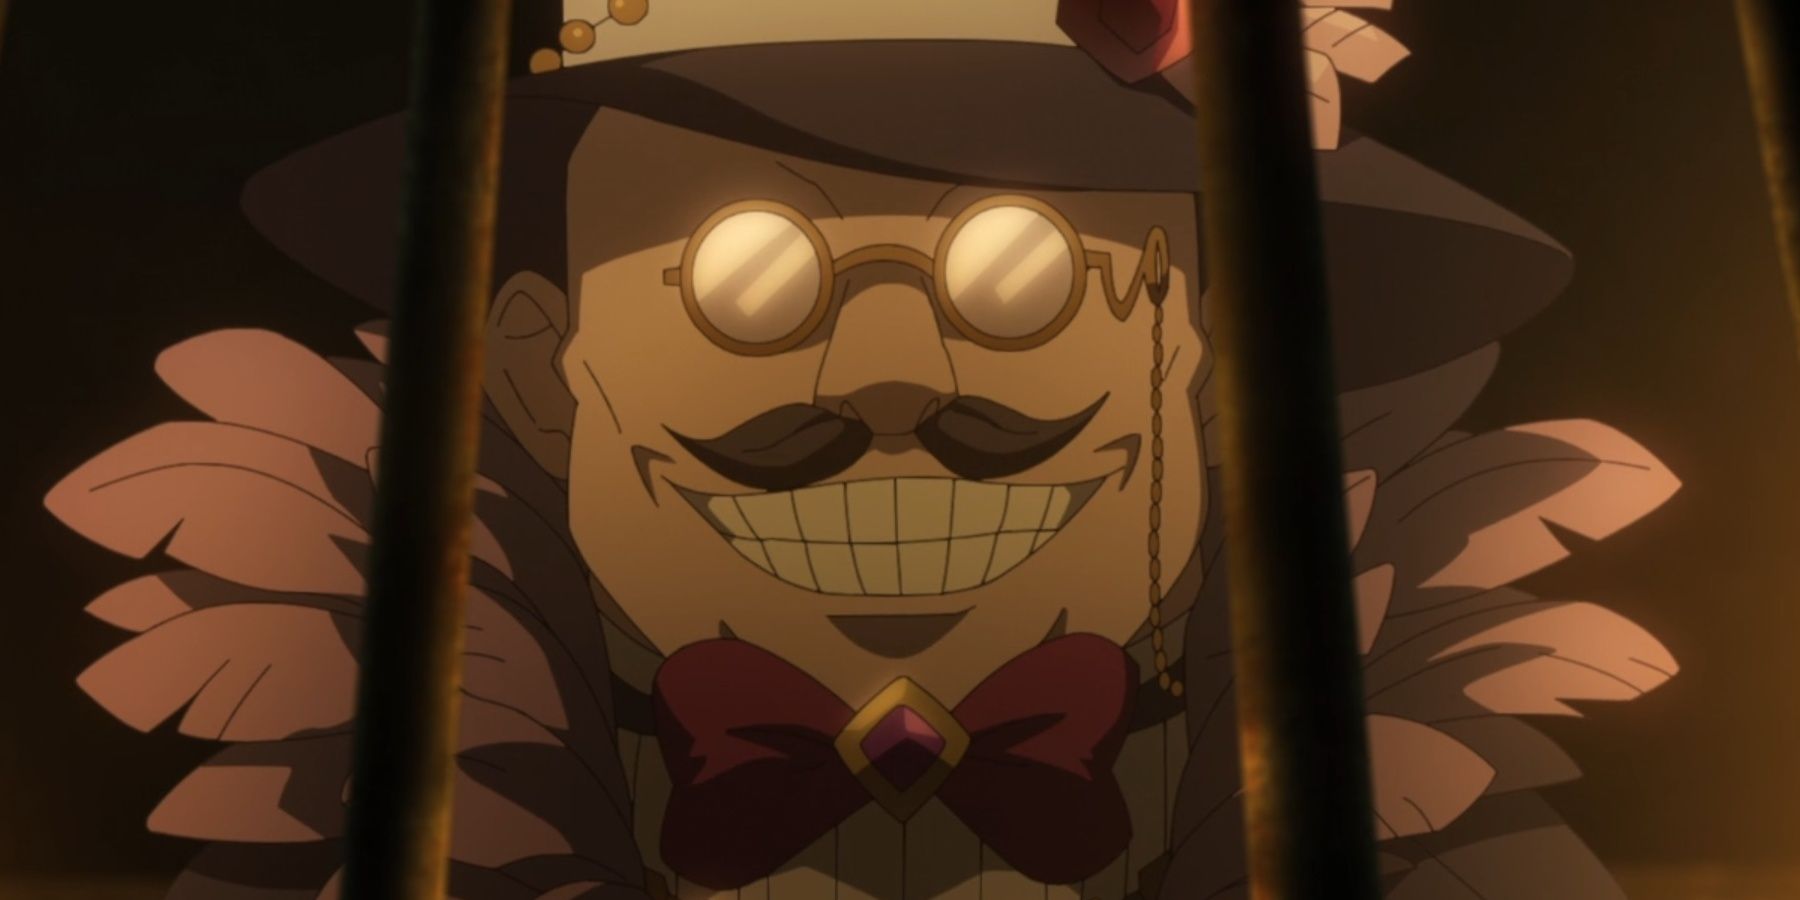 The slave trader from The Rising of the Shield Hero.